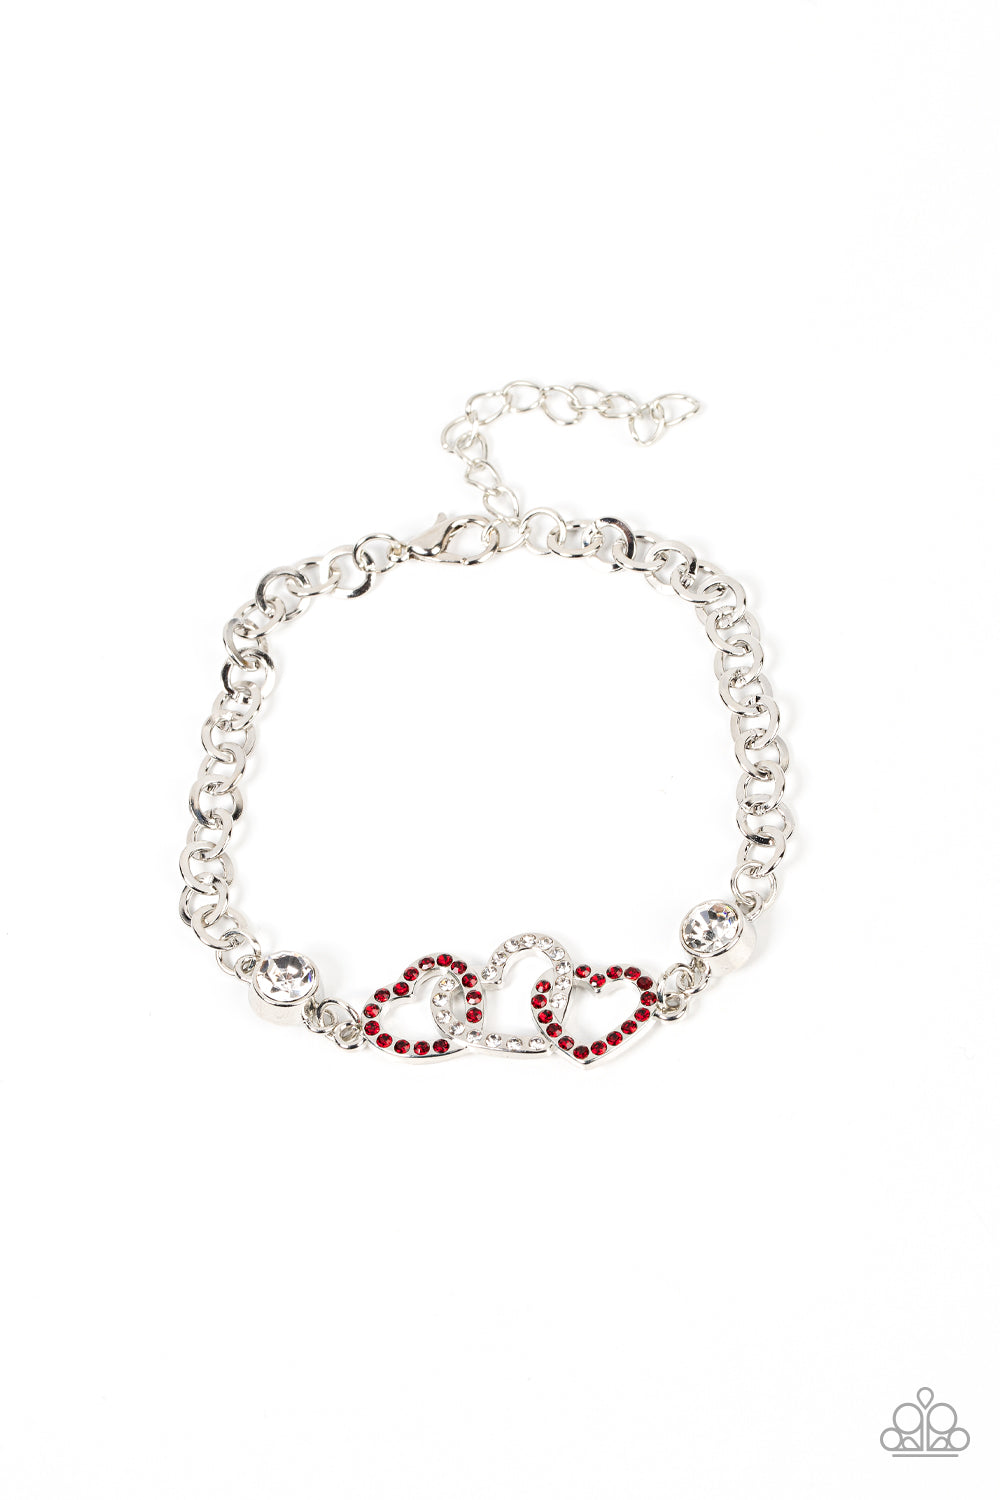 Desirable Dazzle Bracelet (Red, White, Pink)